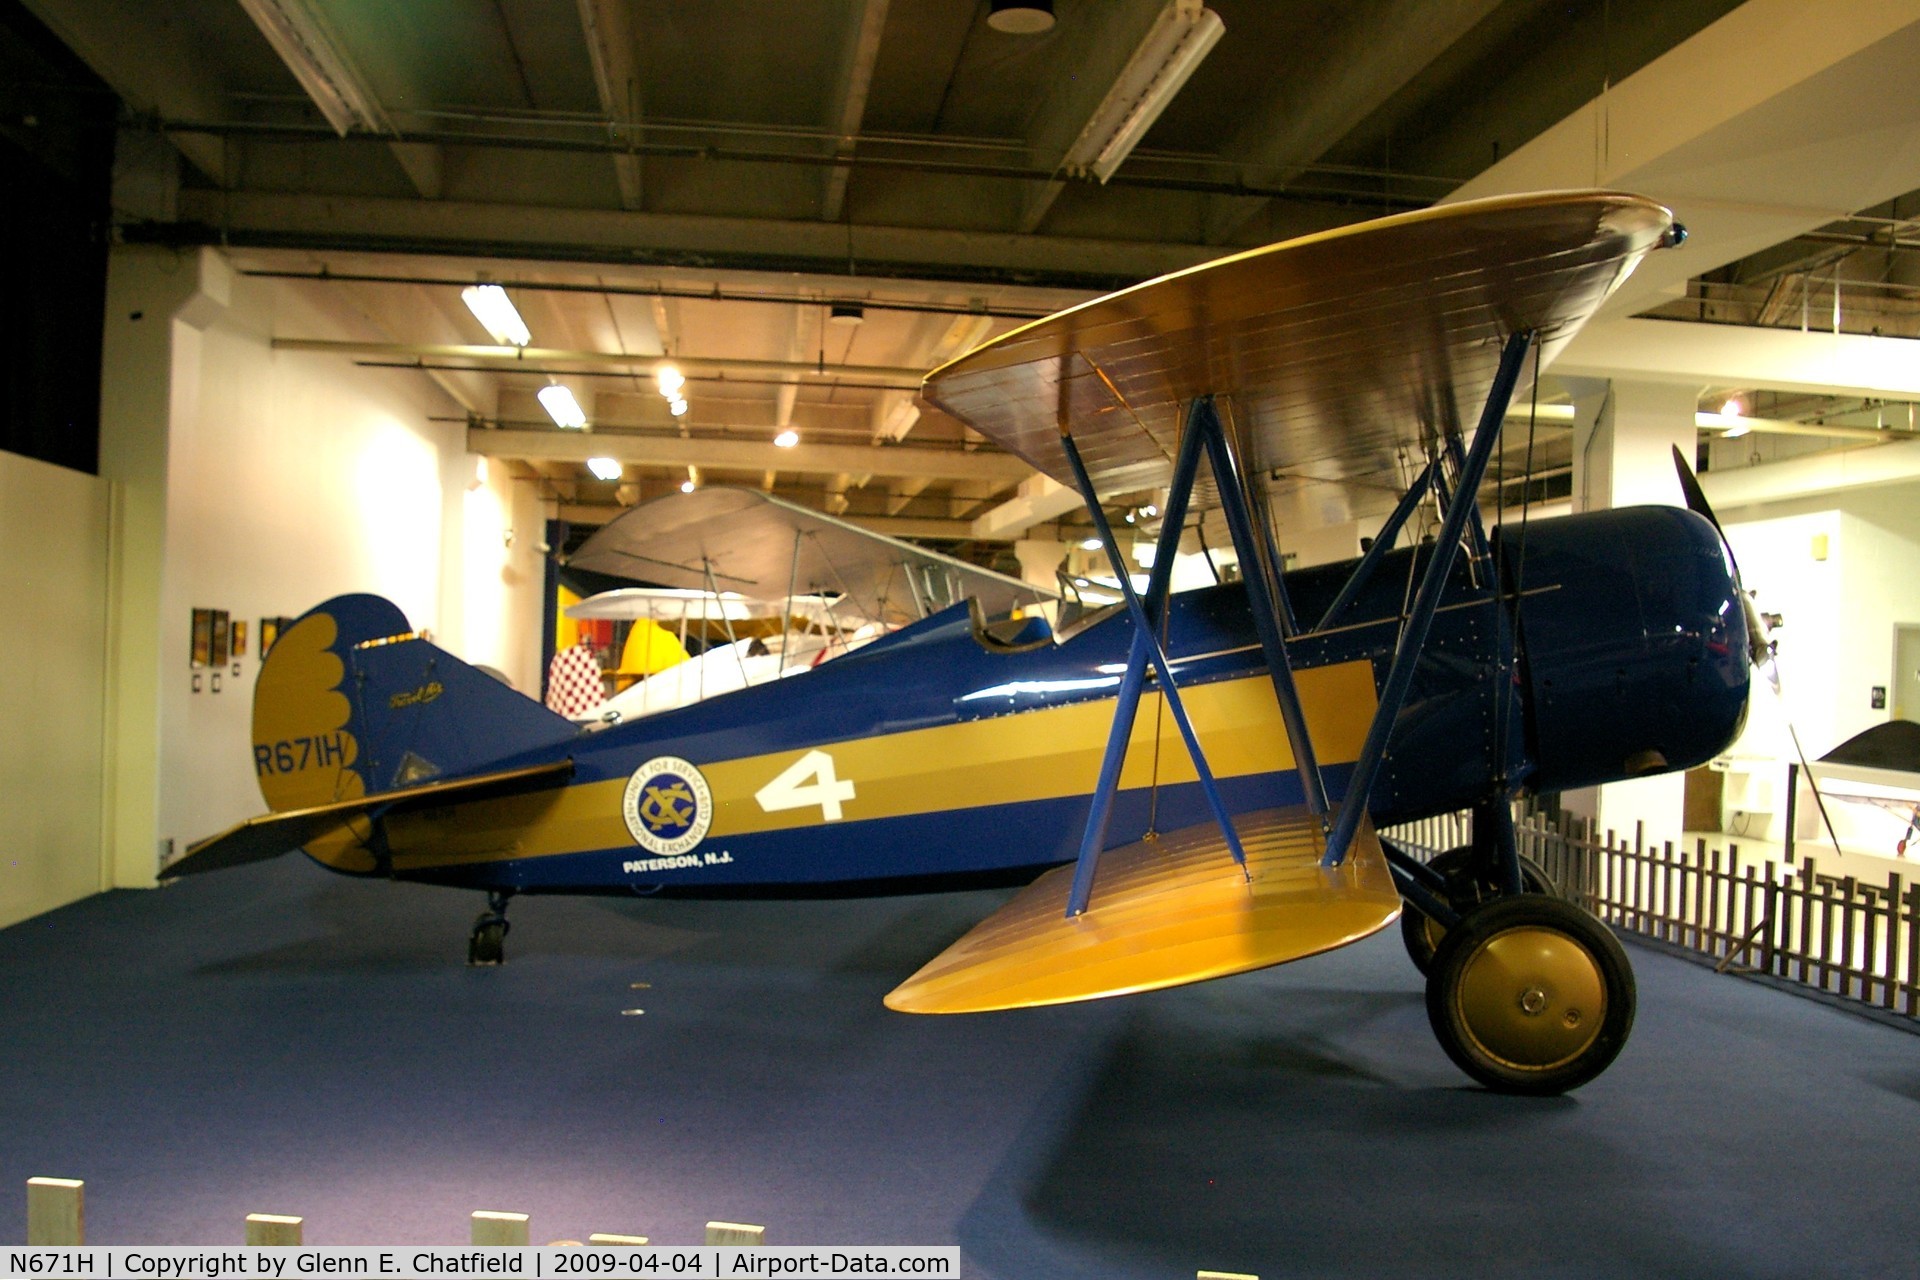 N671H, 1929 Travel Air D-4000 C/N 1266, At the Science Museum of Oklahoma in Oklahoma City